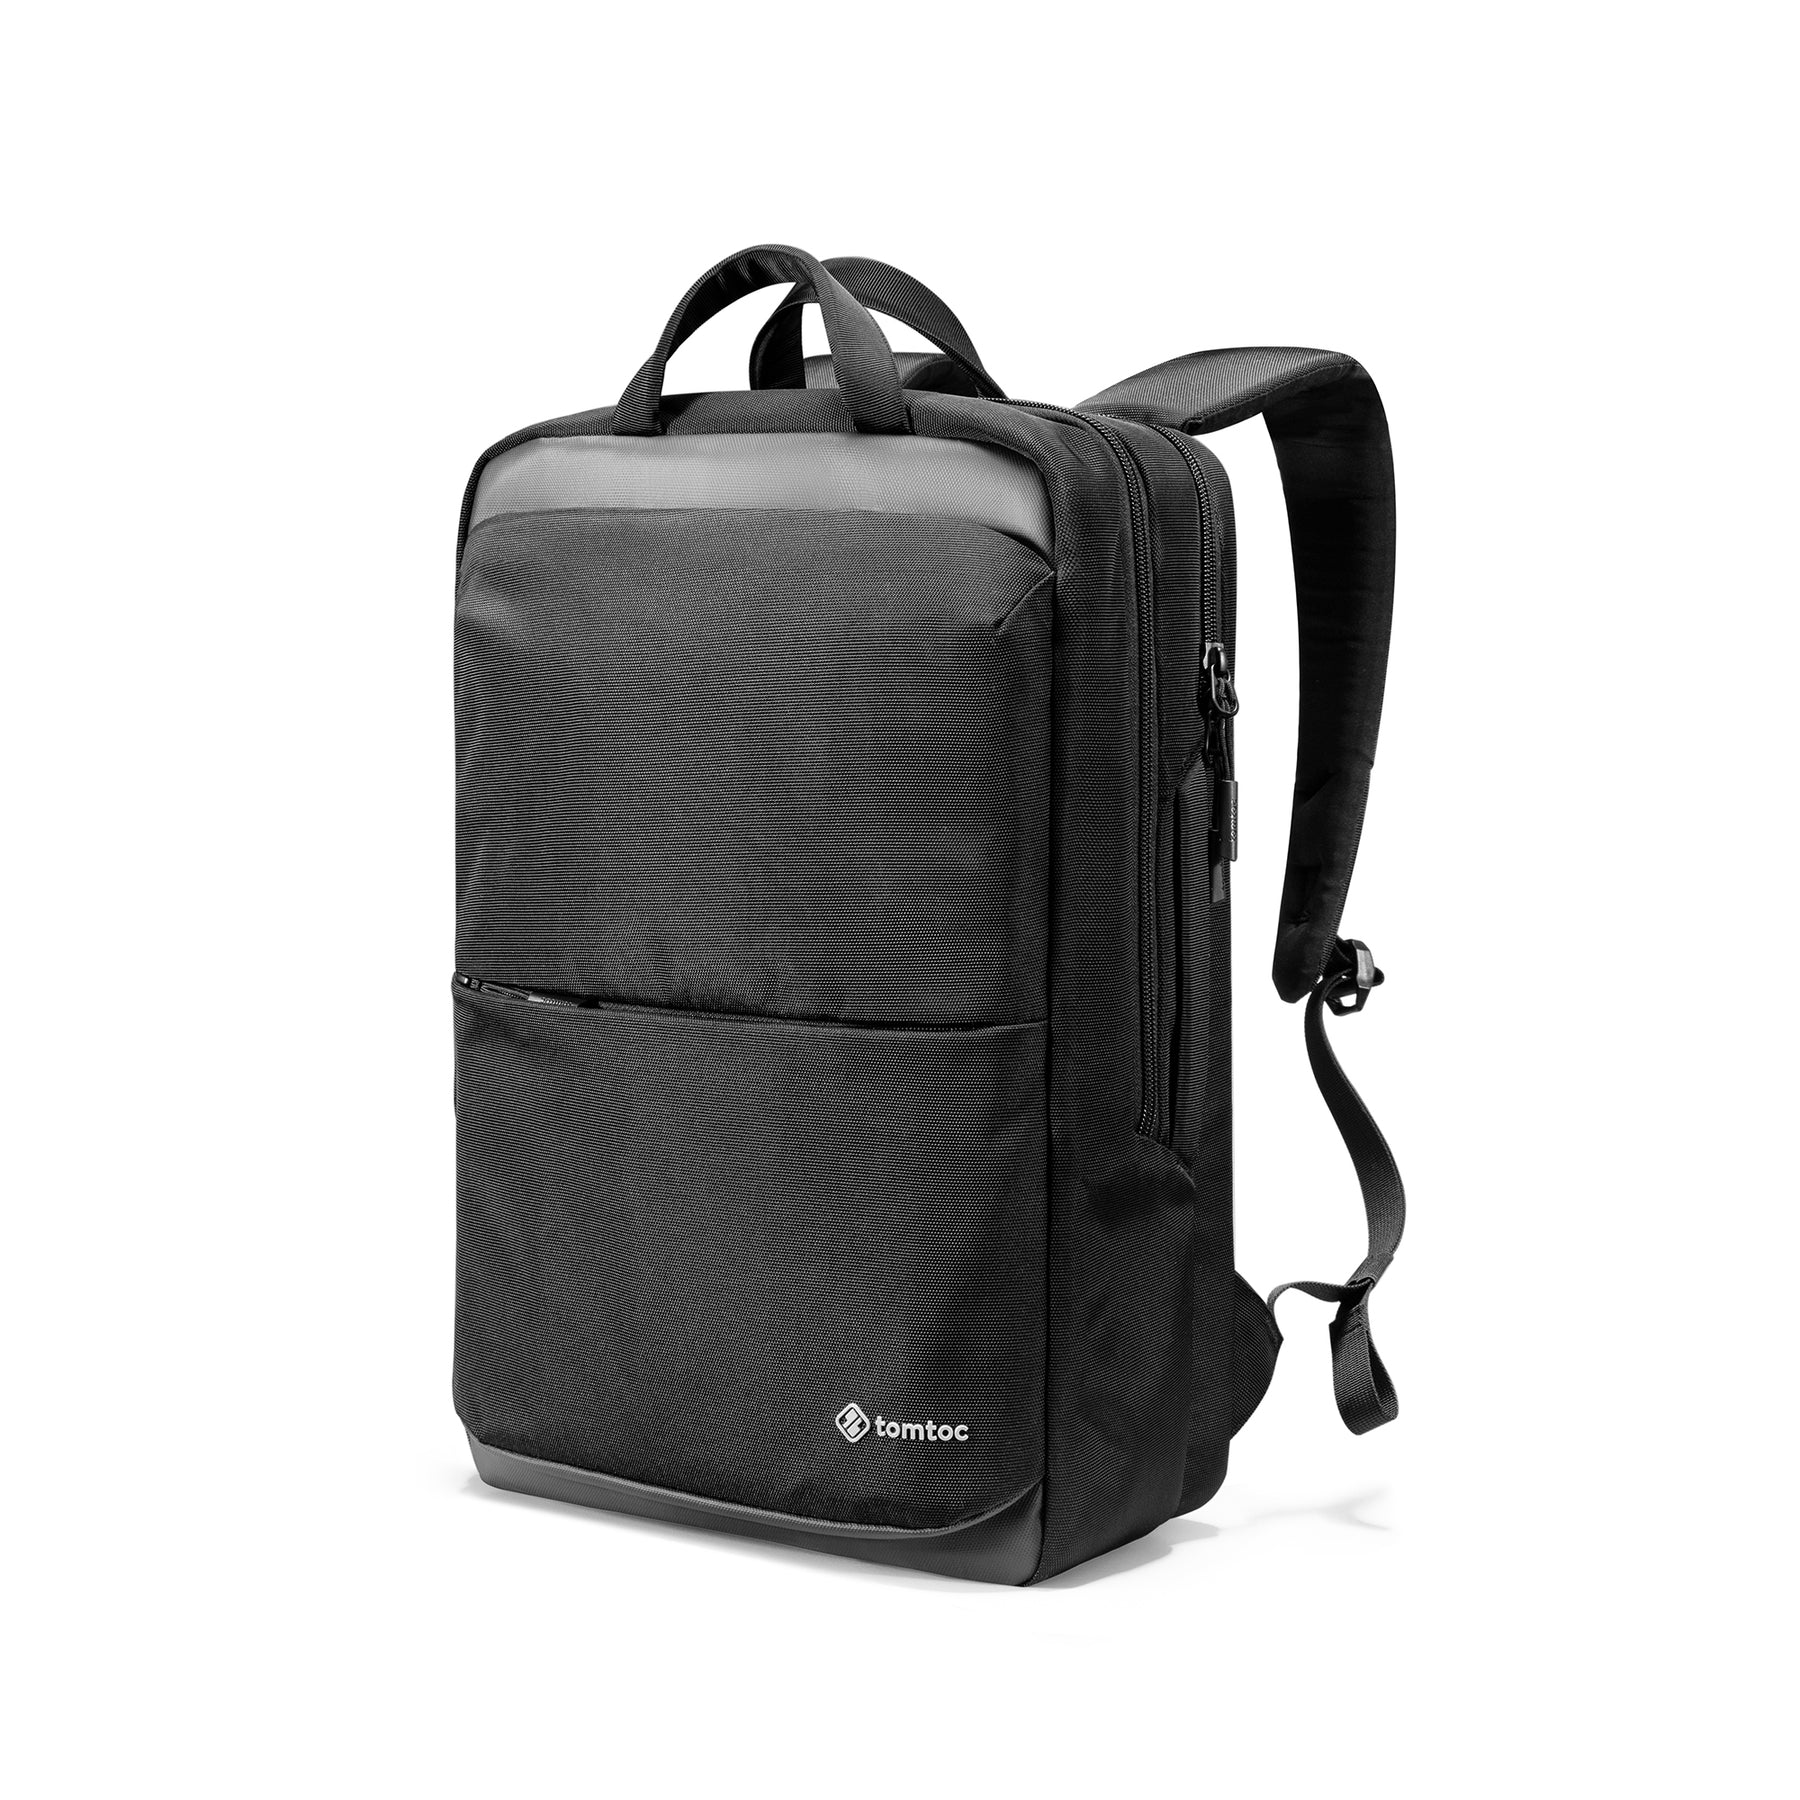 tomtoc 17.3 Inch Protective Laptop / Travel Commuter Backpack - Black